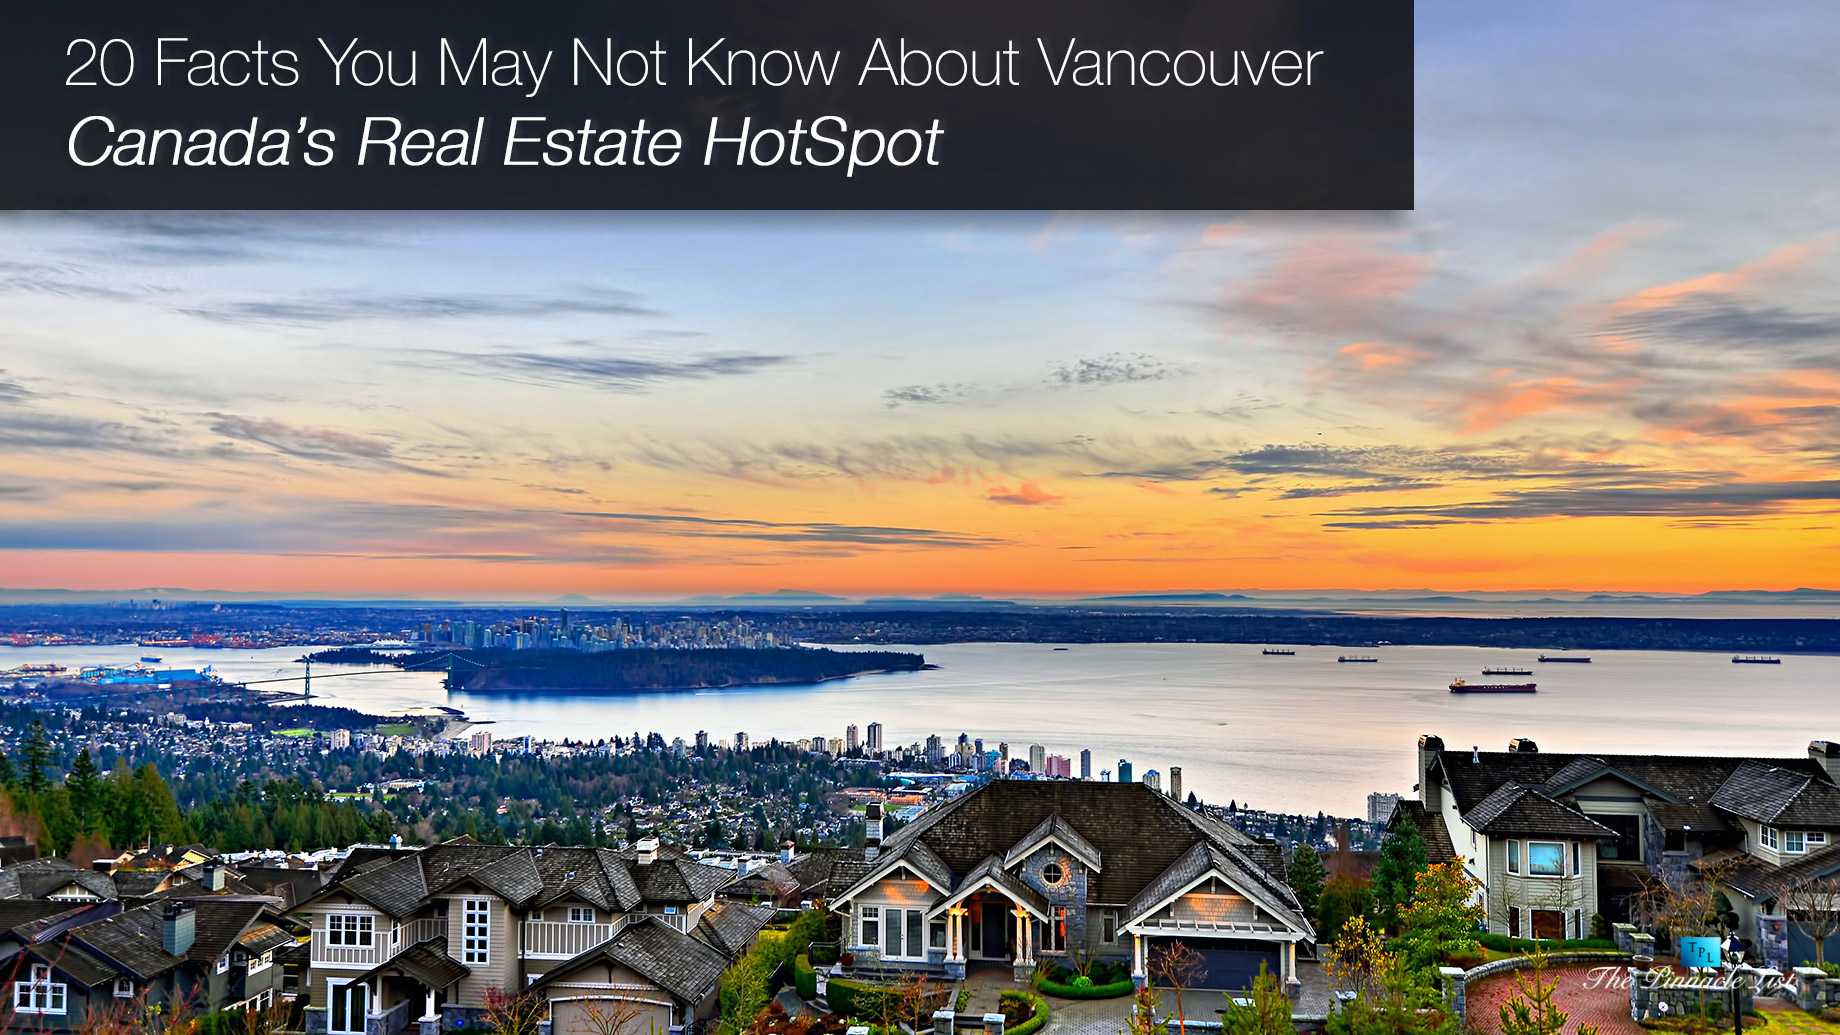 20 Facts You May Not Know About Vancouver - Canada’s Real Estate Hotspot